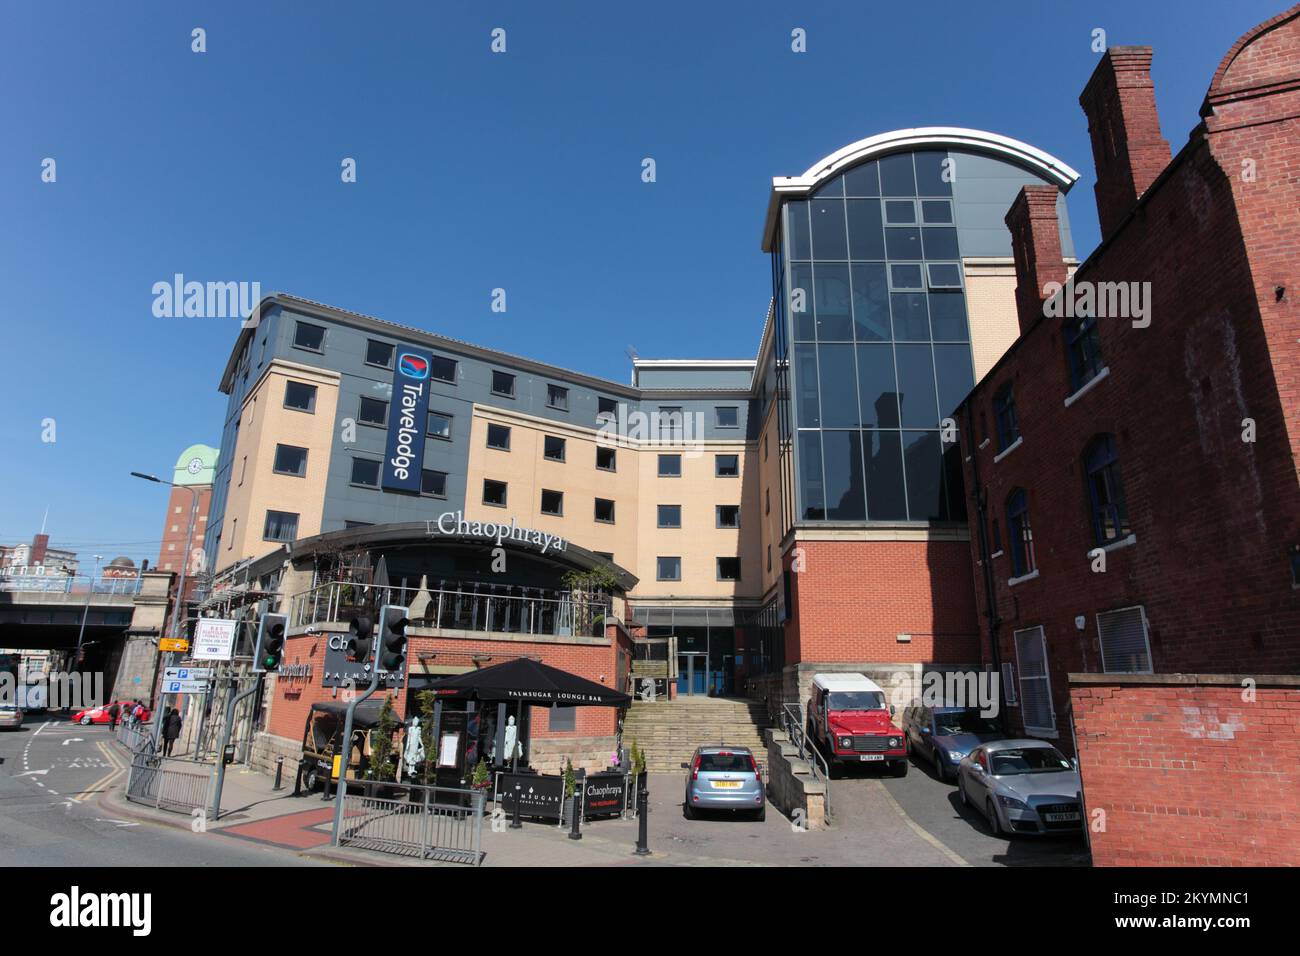 Chaophraya & Travelodge Leeds Central, Blayds Court, Blayds Yard, Off Swinegate, Leeds, LS1 4AD Stock Photo